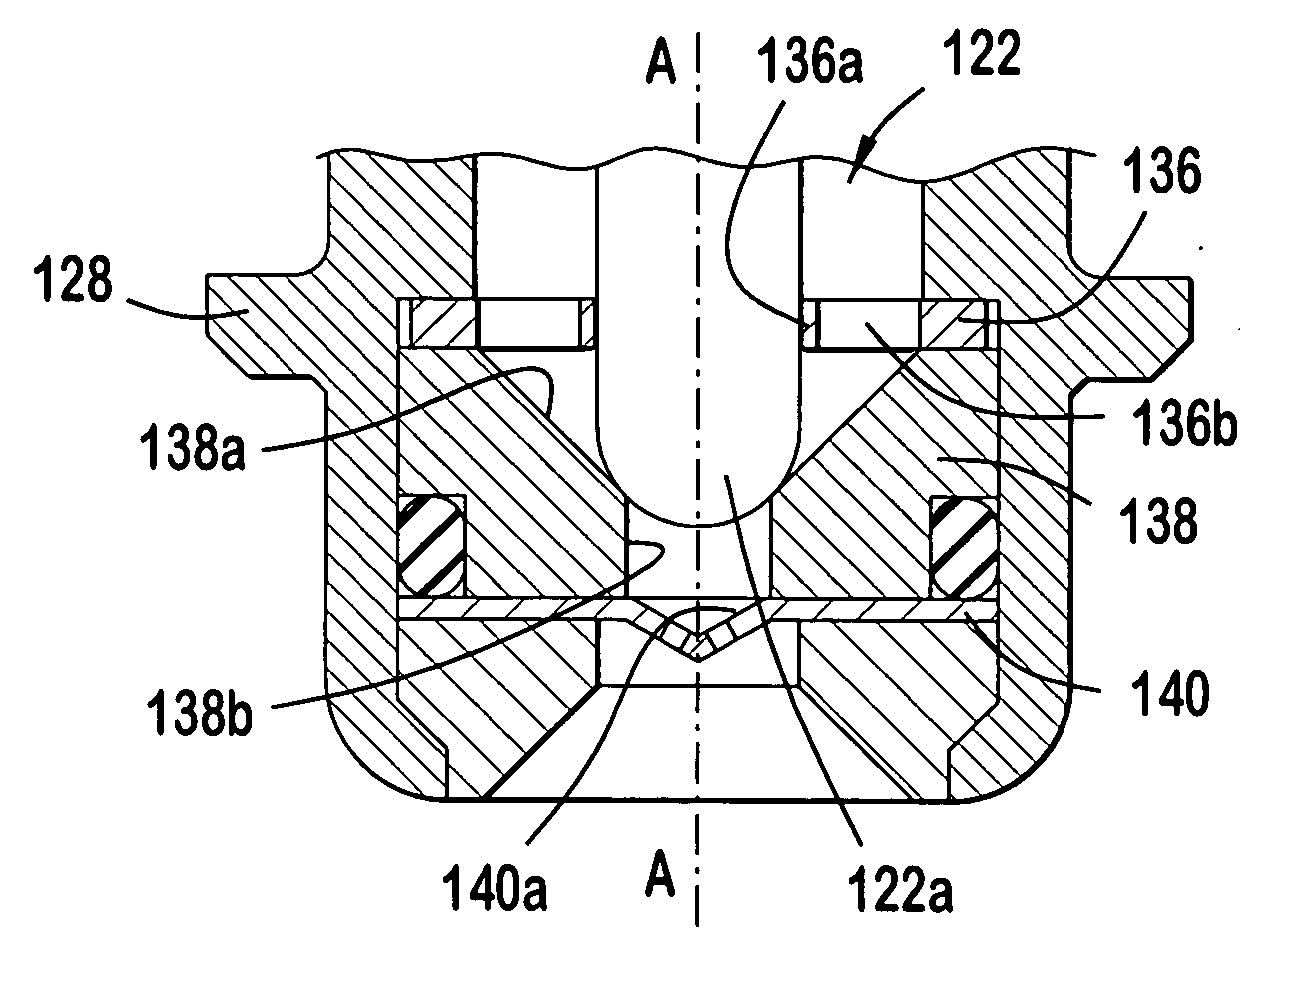 Fuel injector including a compound angle orifice disc for adjusting spray targeting